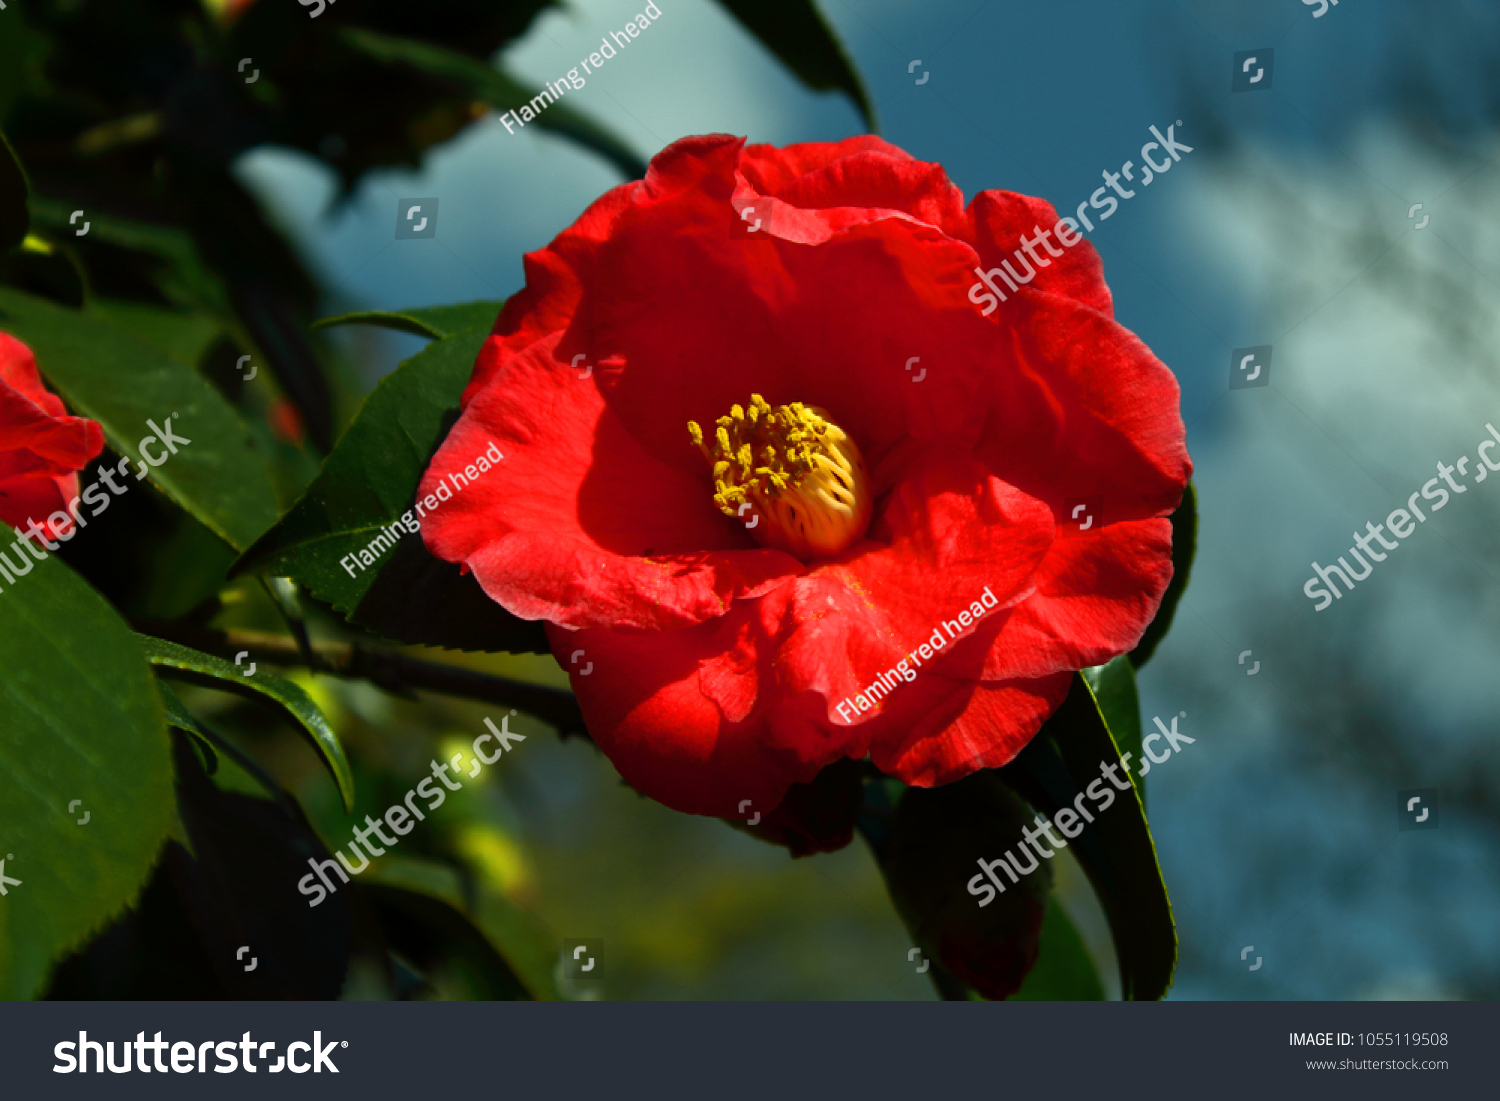 One Variety Camellia Flower Camellia Japonica Nature Stock Image 1055119508